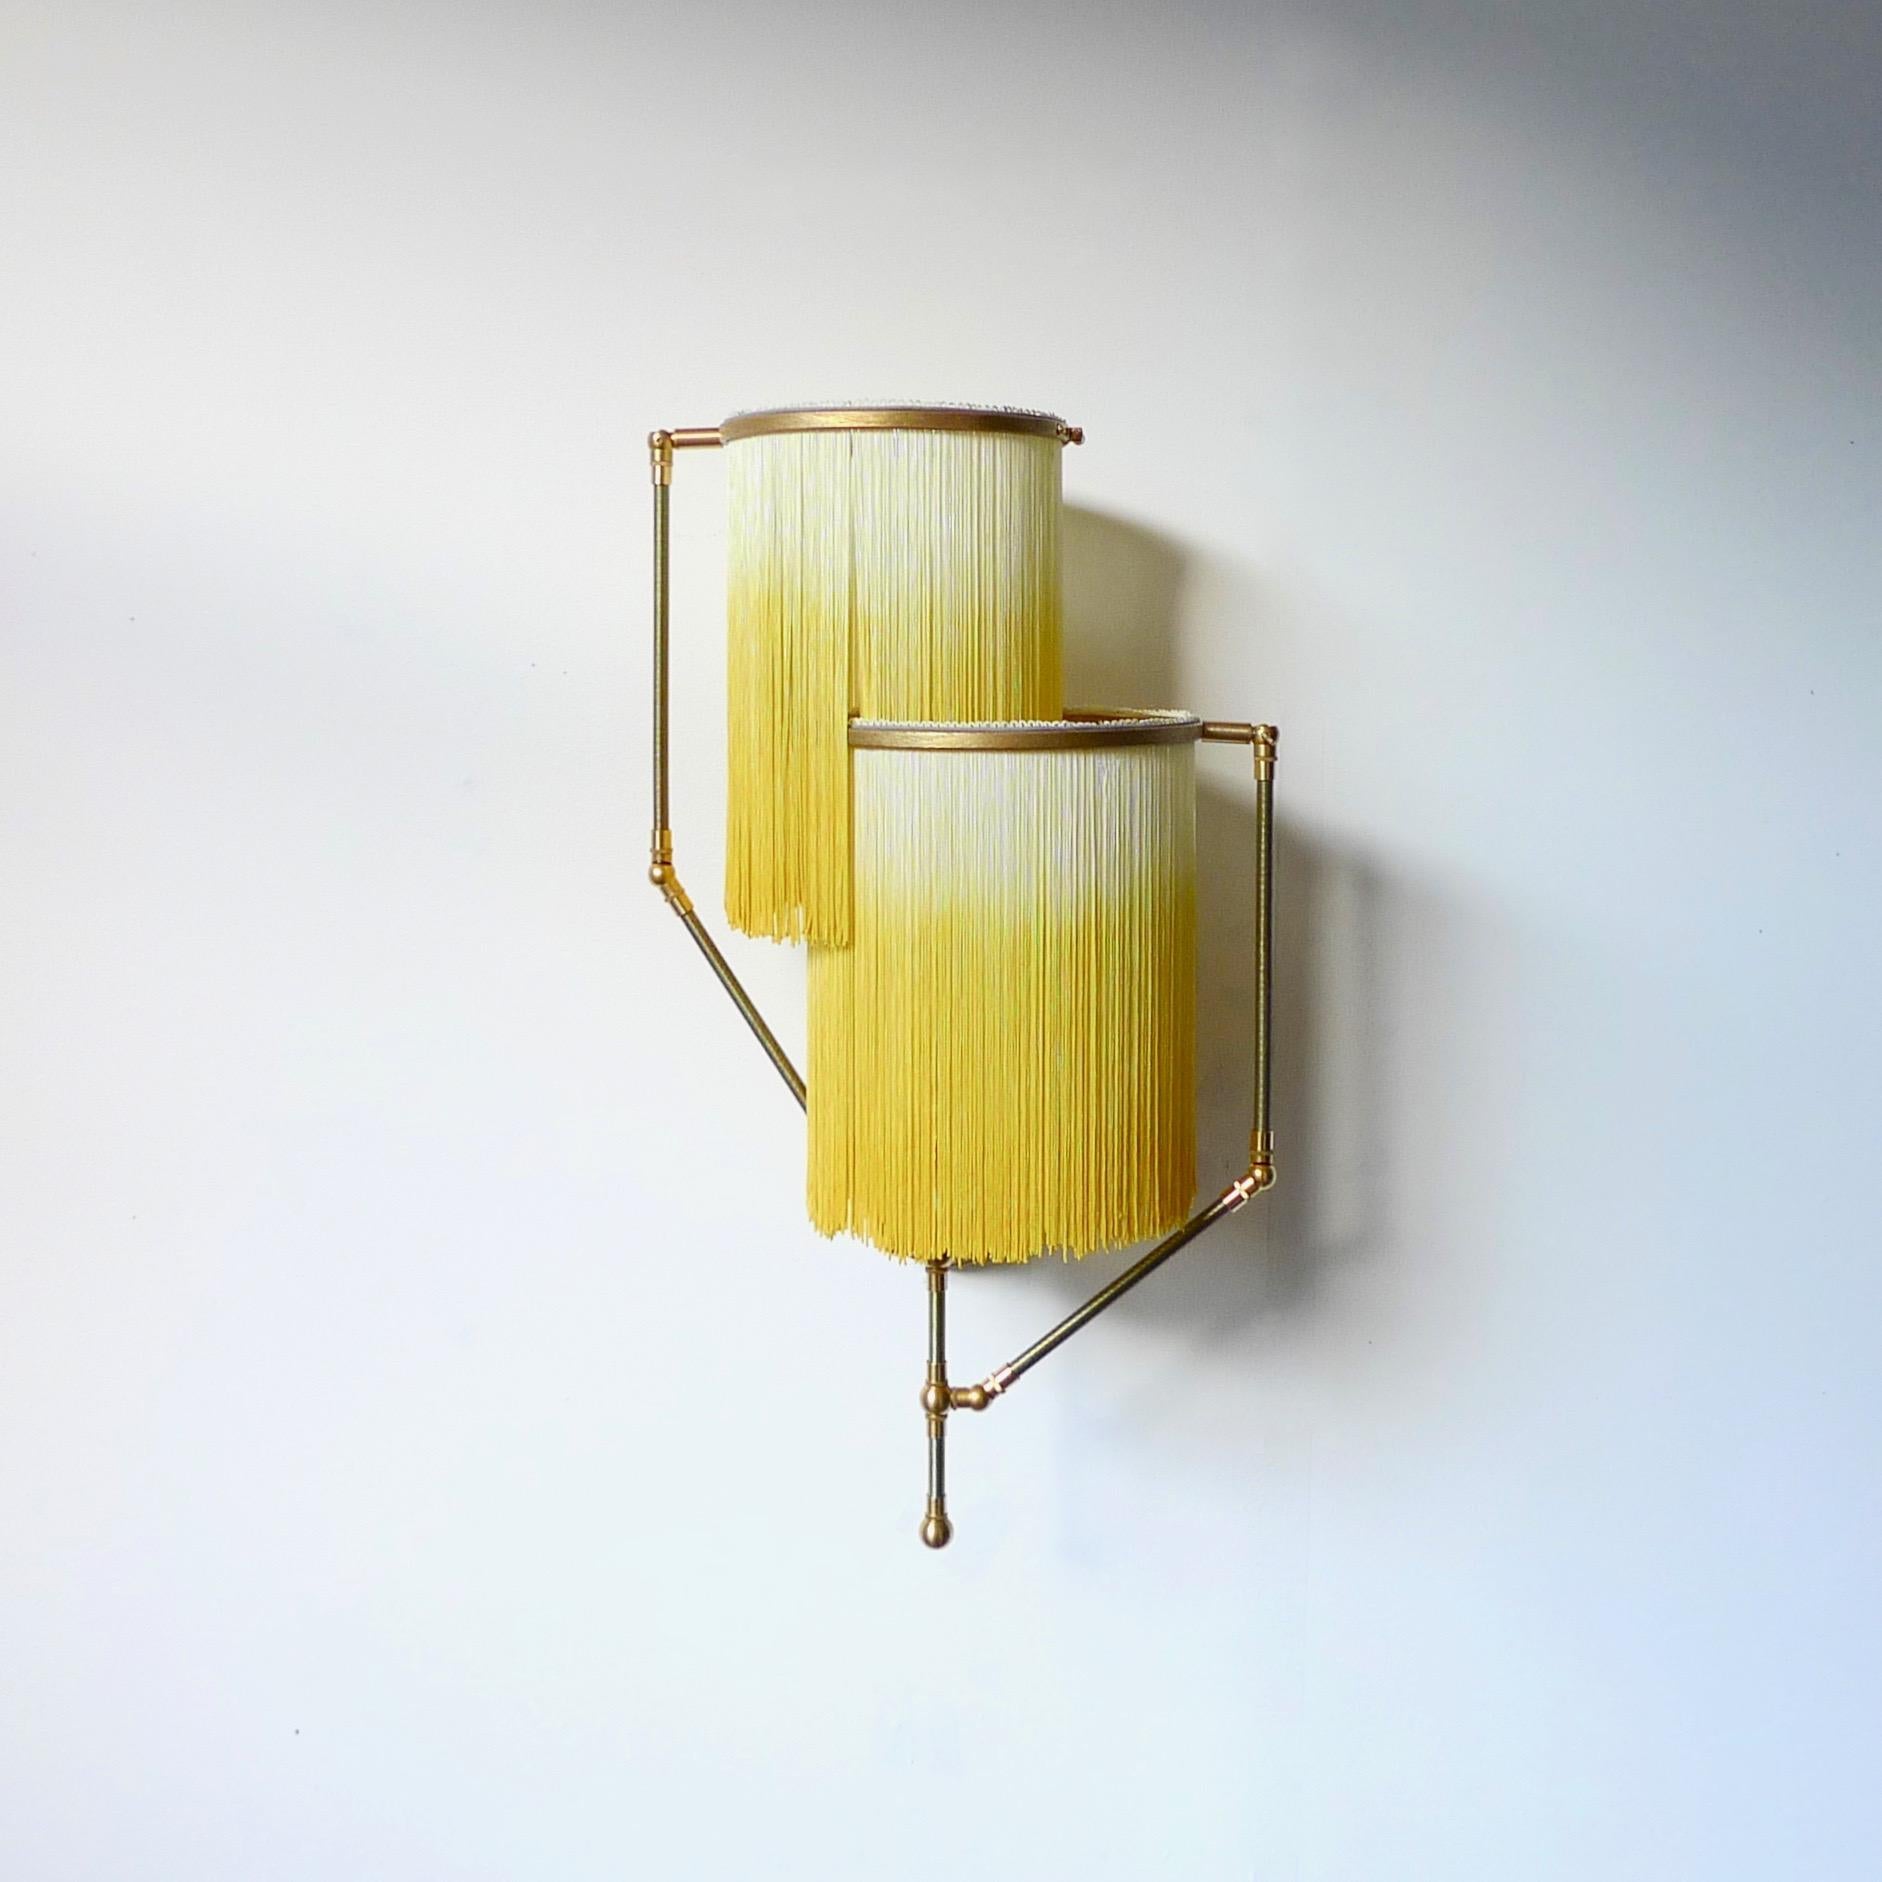 Yellow Charme sconce lamp, Sander Bottinga

Dimensions: 50 x W 38 x D 27 cm
Handmade in brass, leather, wood and dip dyed colored Fringes in viscose.
The movable arms makes it possible to move the circles with fringes in different positions.
So